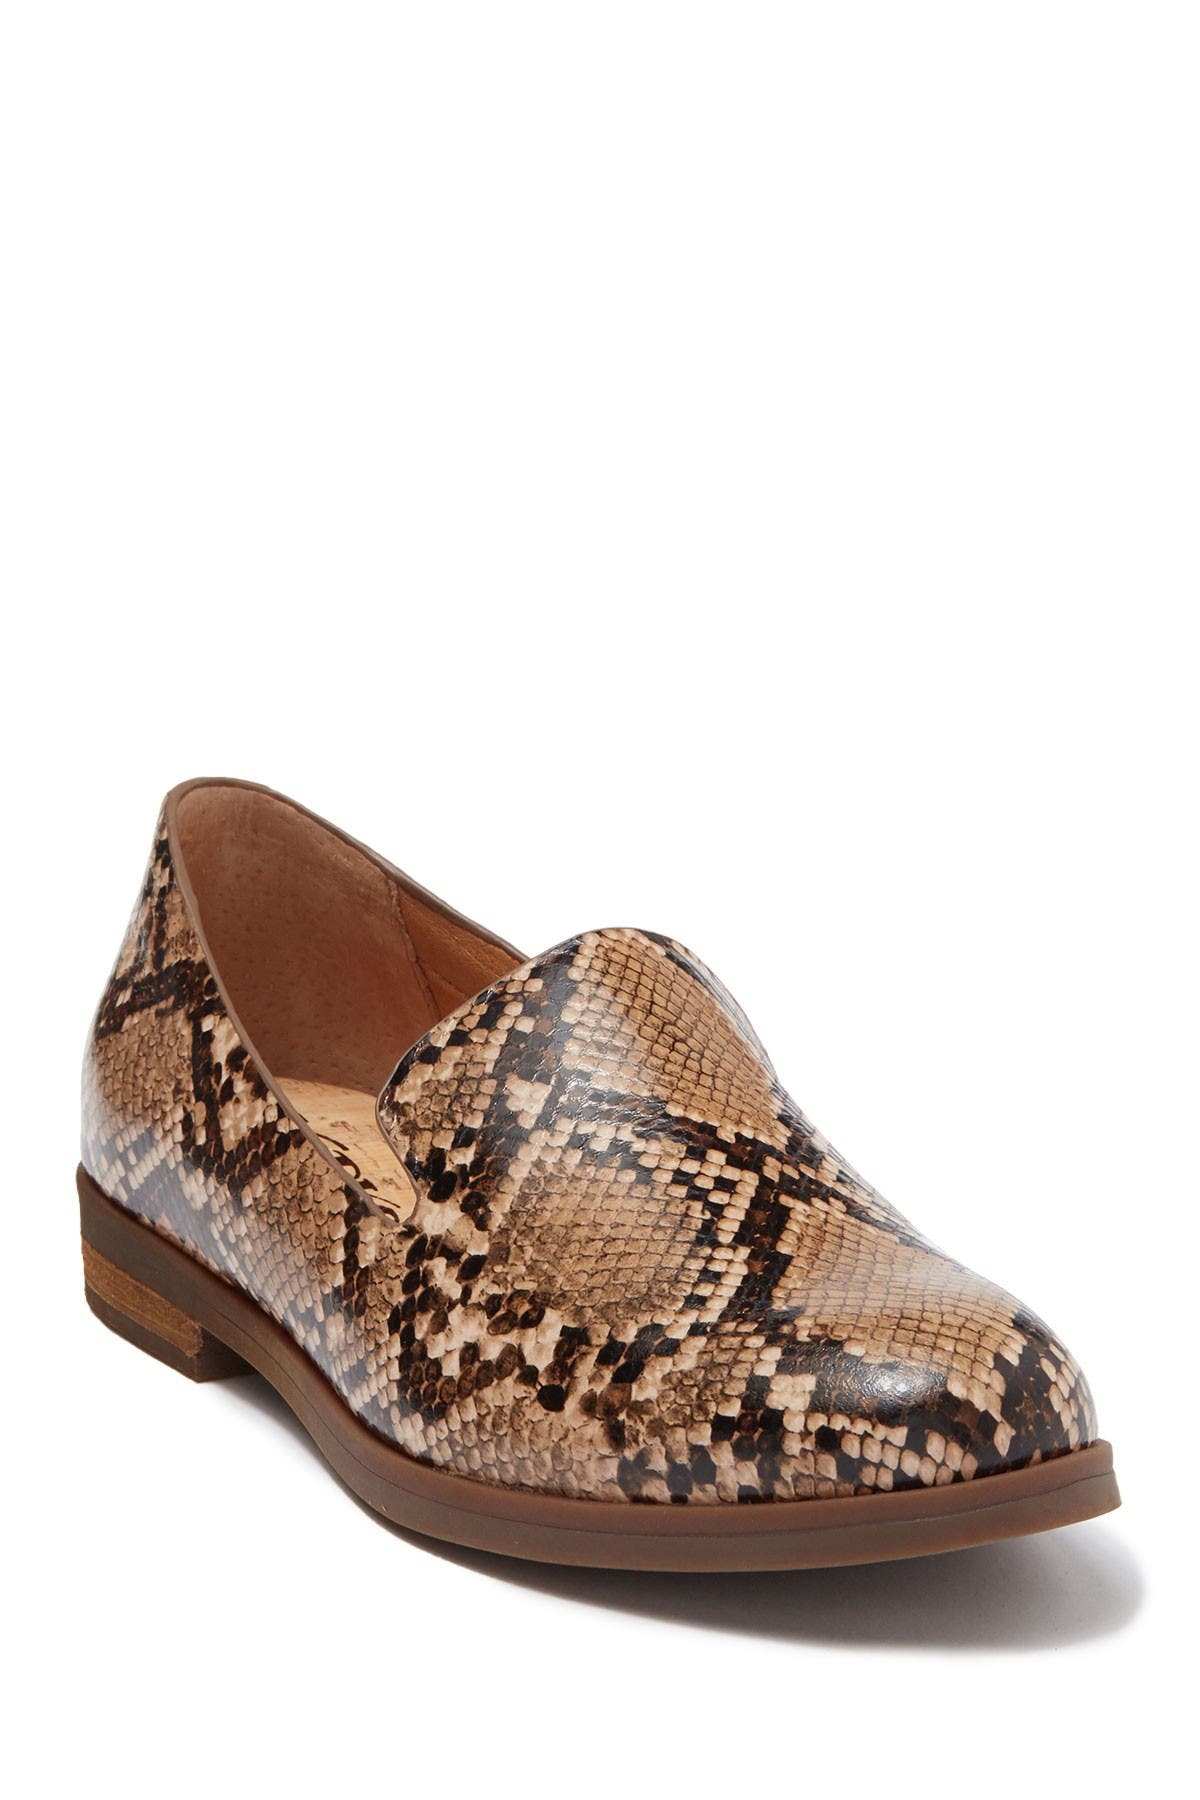 animal skin loafers